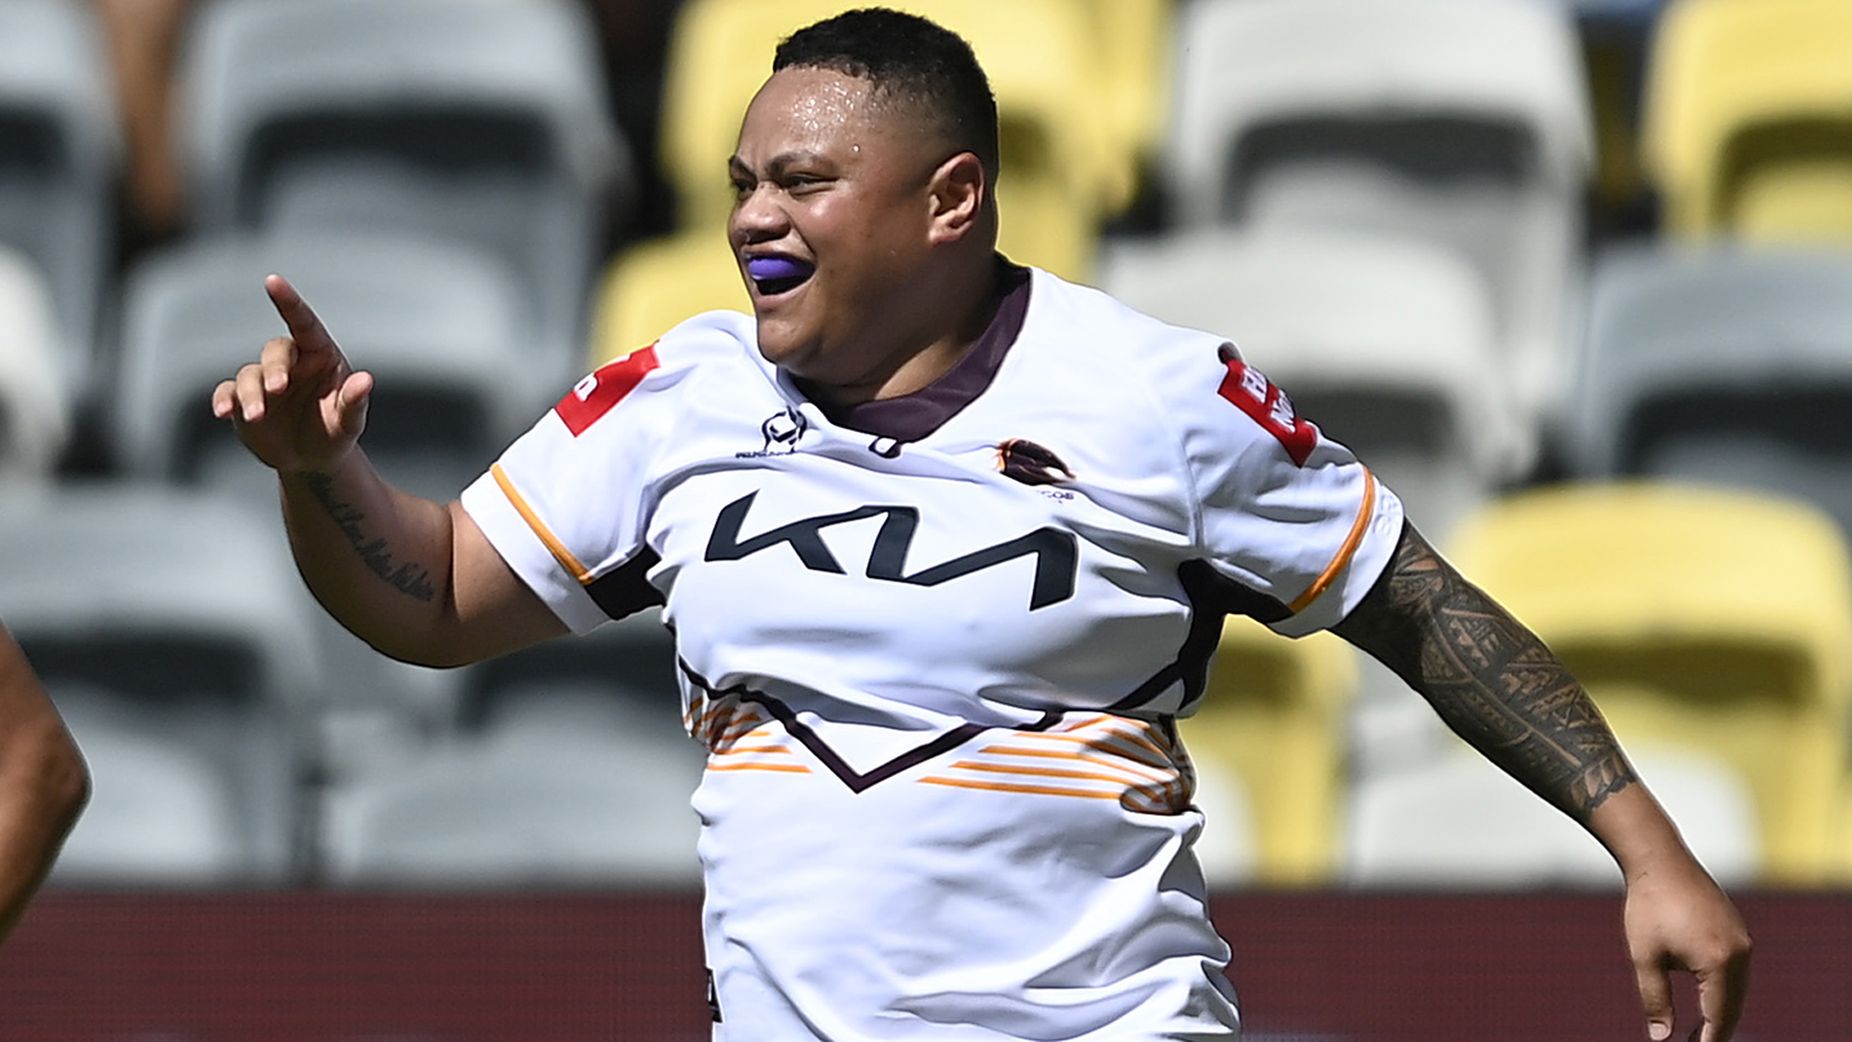 Mele Hufanga of the Broncos celebrates after scoring a try during the round three NRLW match between North Queensland Cowboys and Brisbane Broncos.